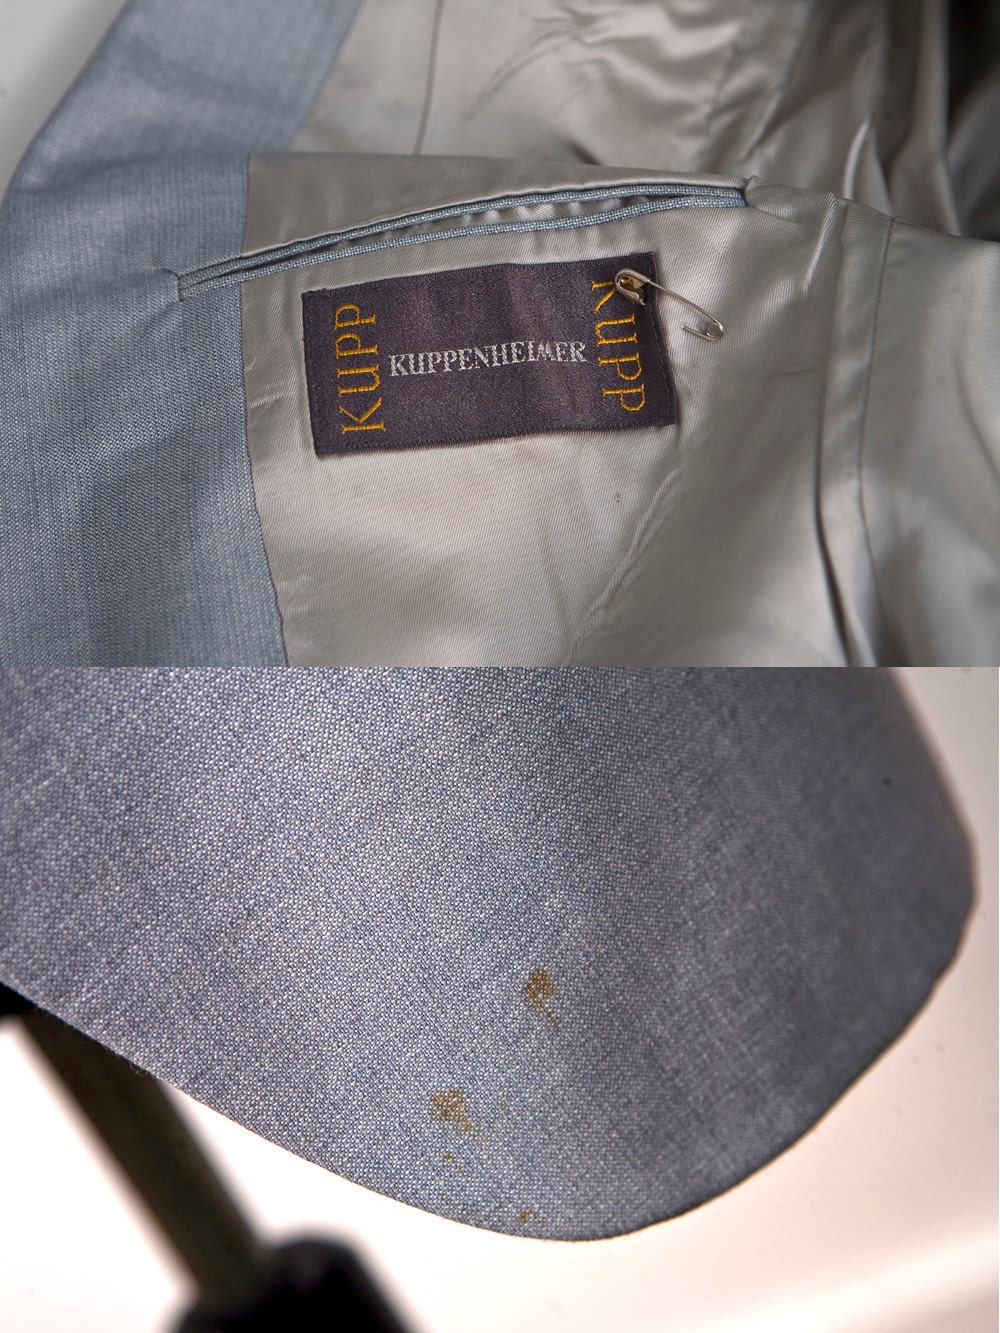 Men's Suit / Vintage Grey Blazer and Trousers by Kuppenheimer / Size 44 ...